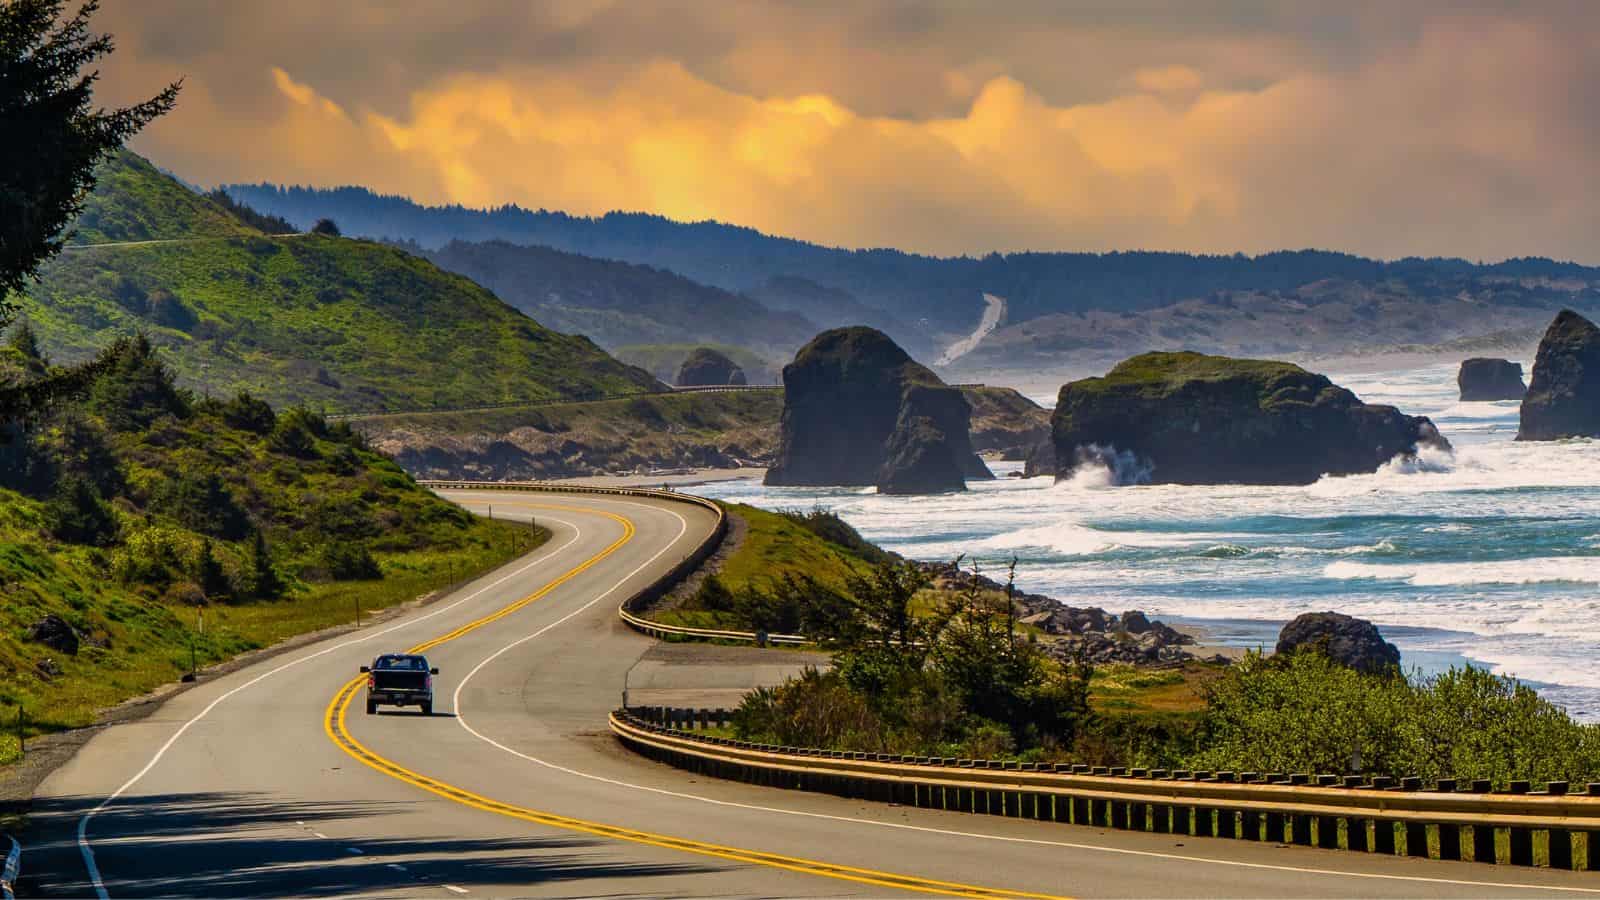 <p>Travel along Oregon’s Highway 101, winding through picture-perfect coastal towns, lush forests, and stunning ocean views.</p><p>This 363-mile route stretches along the Pacific coastline, offering opportunities for whale watching, beachcombing, and exploring historic lighthouses.</p><p>Towns like Astoria, Cannon Beach, and Newport are great bases for enjoying outdoor activities such as hiking, kayaking, and fishing. Along this breathtaking route, explore the Oregon Dunes National Recreation Area, Cape Perpetua Scenic Area, and the Sea Lion Caves.</p><p>There are tons of <a href="https://whatthefab.com/airbnb-oregon-coast.html" rel="follow">Airbnbs on the Oregon coast</a> for staying a few nights if one of these cities demands a longer stay—the best road trips are those with flexibility!</p>